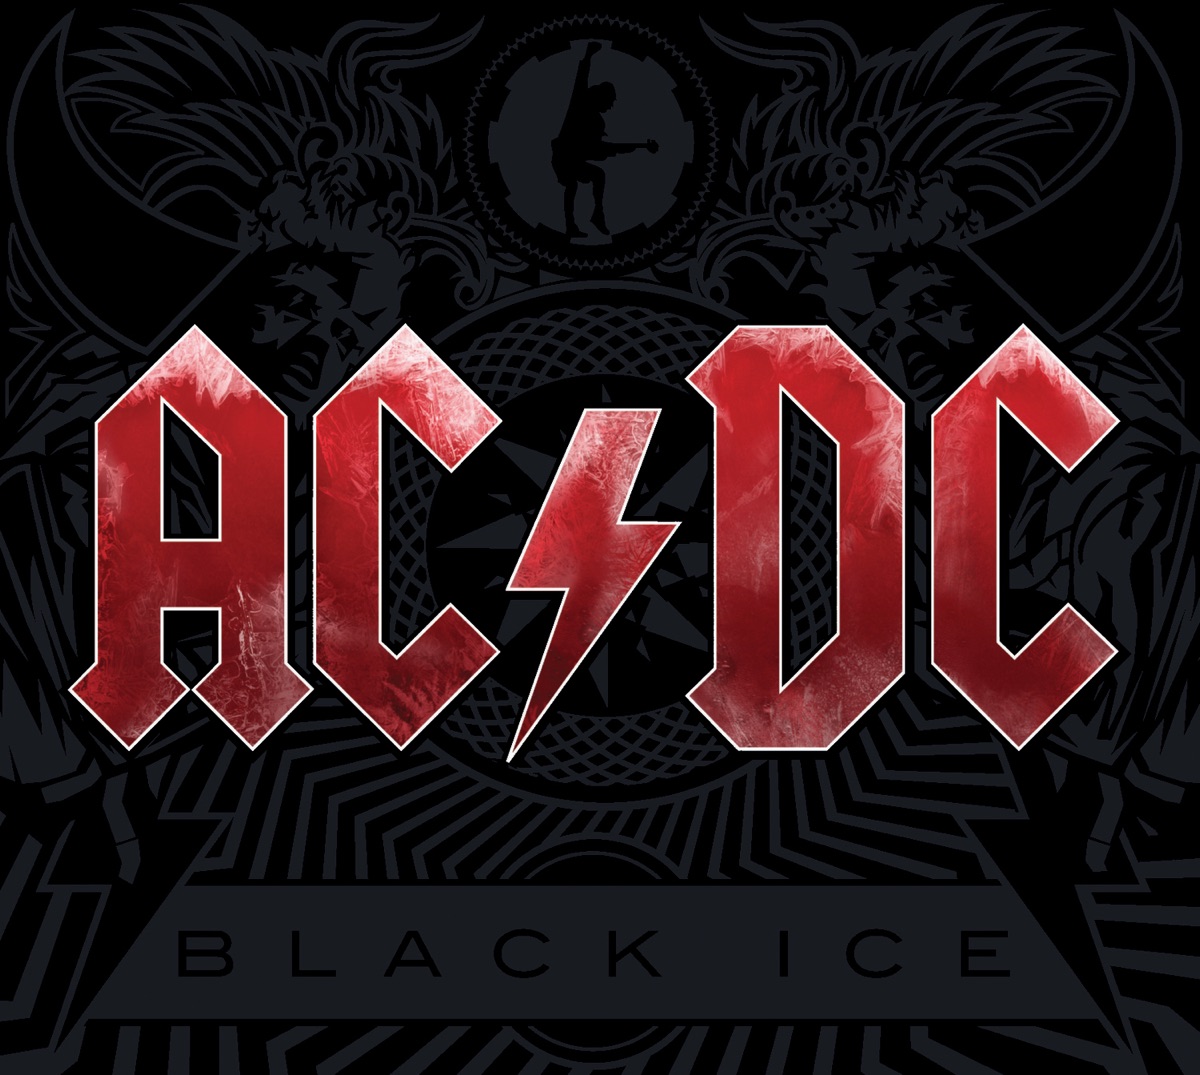 AC/DC - Live Wire  Acdc wallpaper, Acdc albums, Acdc